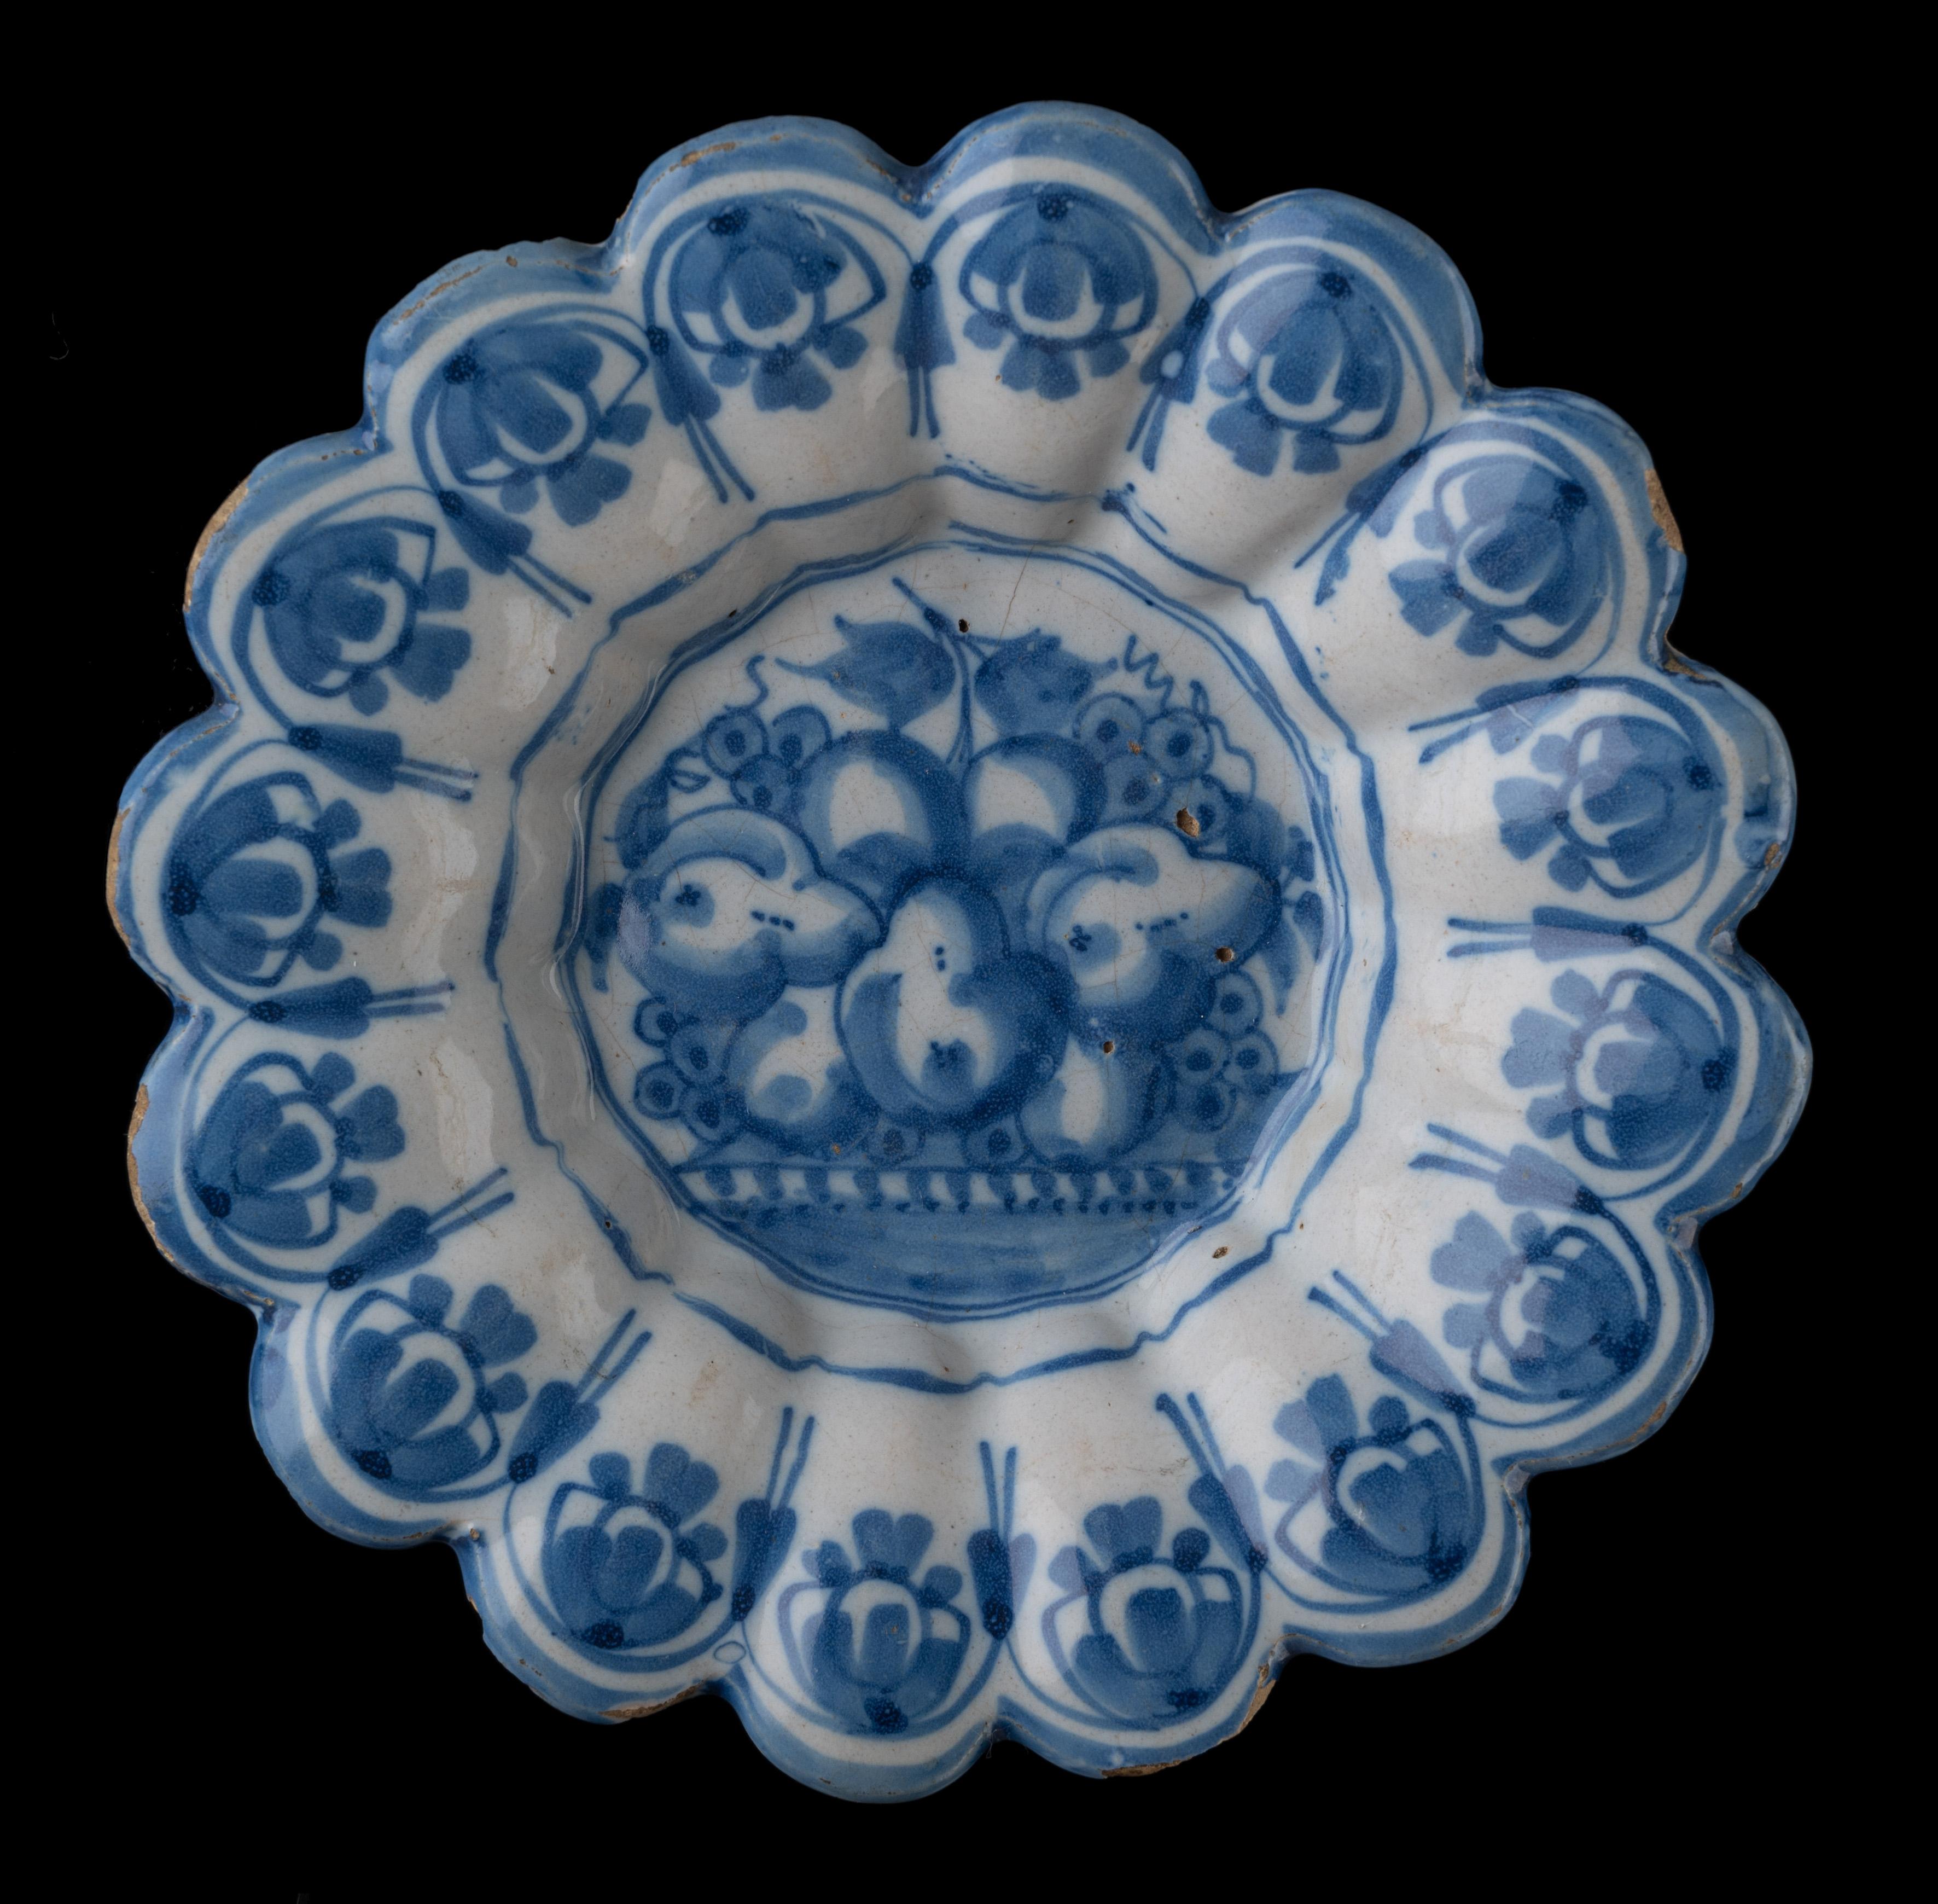 Blue and white lobed dish with fruit still life. Northern Netherlands, 1650-1680
Dimensions: Diameter 22,9 cm / 9.01 in.

The blue and white lobed dish is composed of sixteen small lobes and is painted in the centre with a still life of three